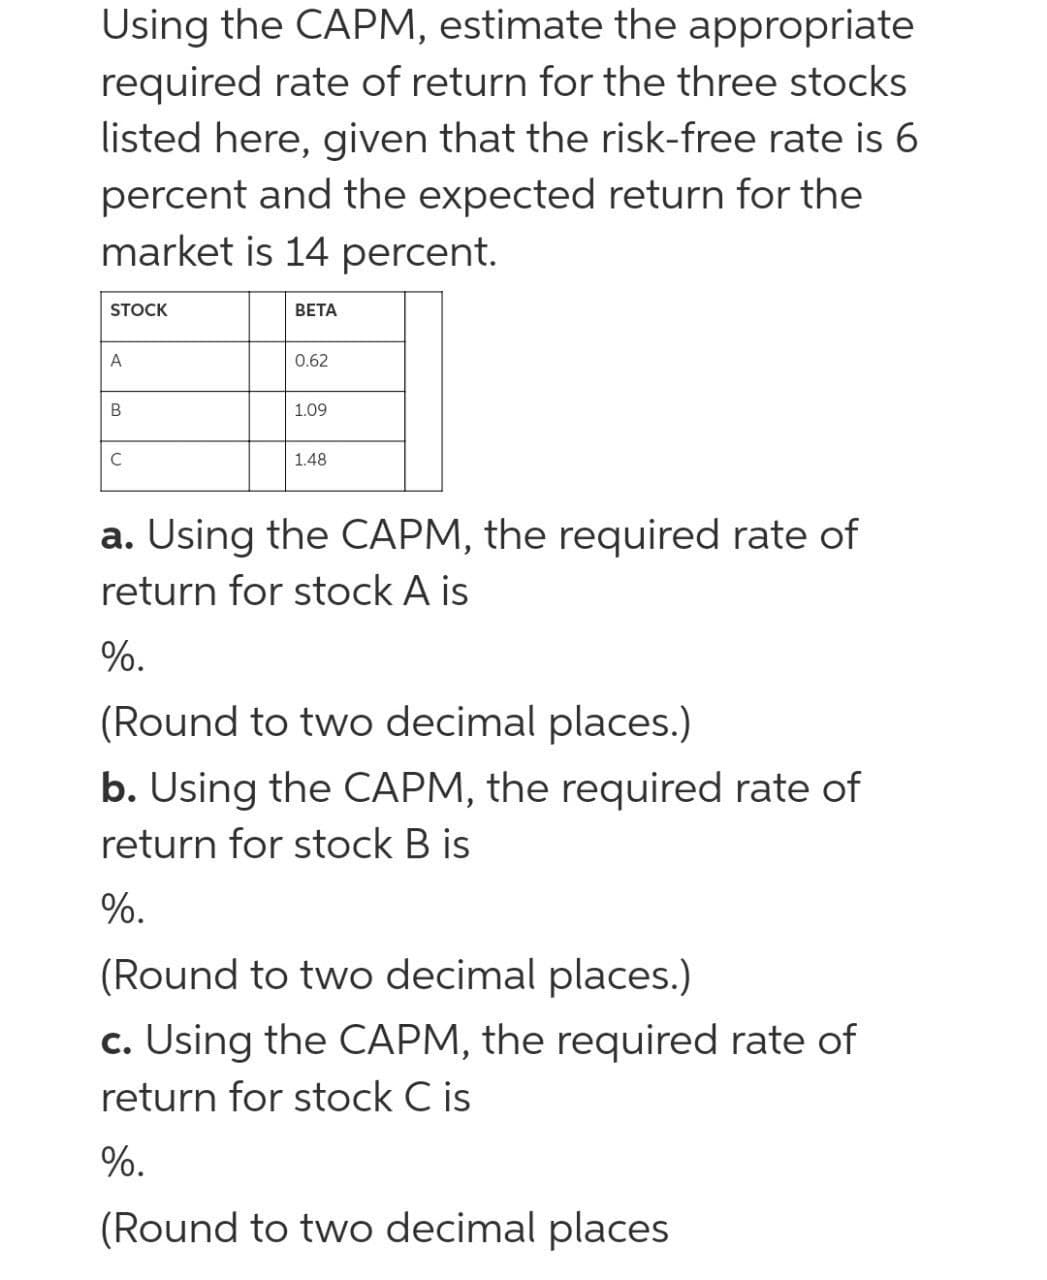 Using the CAPM, estimate the appropriate
required rate of return for the three stocks
listed here, given that the risk-free rate is 6
percent and the expected return for the
market is 14 percent.
STOCK
ВЕТА
A
0.62
B
1.09
1.48
a. Using the CAPM, the required rate of
return for stock A is
%.
(Round to two decimal places.)
b. Using the CAPM, the required rate of
return for stock B is
%.
(Round to two decimal places.)
c. Using the CAPM, the required rate of
return for stock C is
%.
(Round to two decimal places
